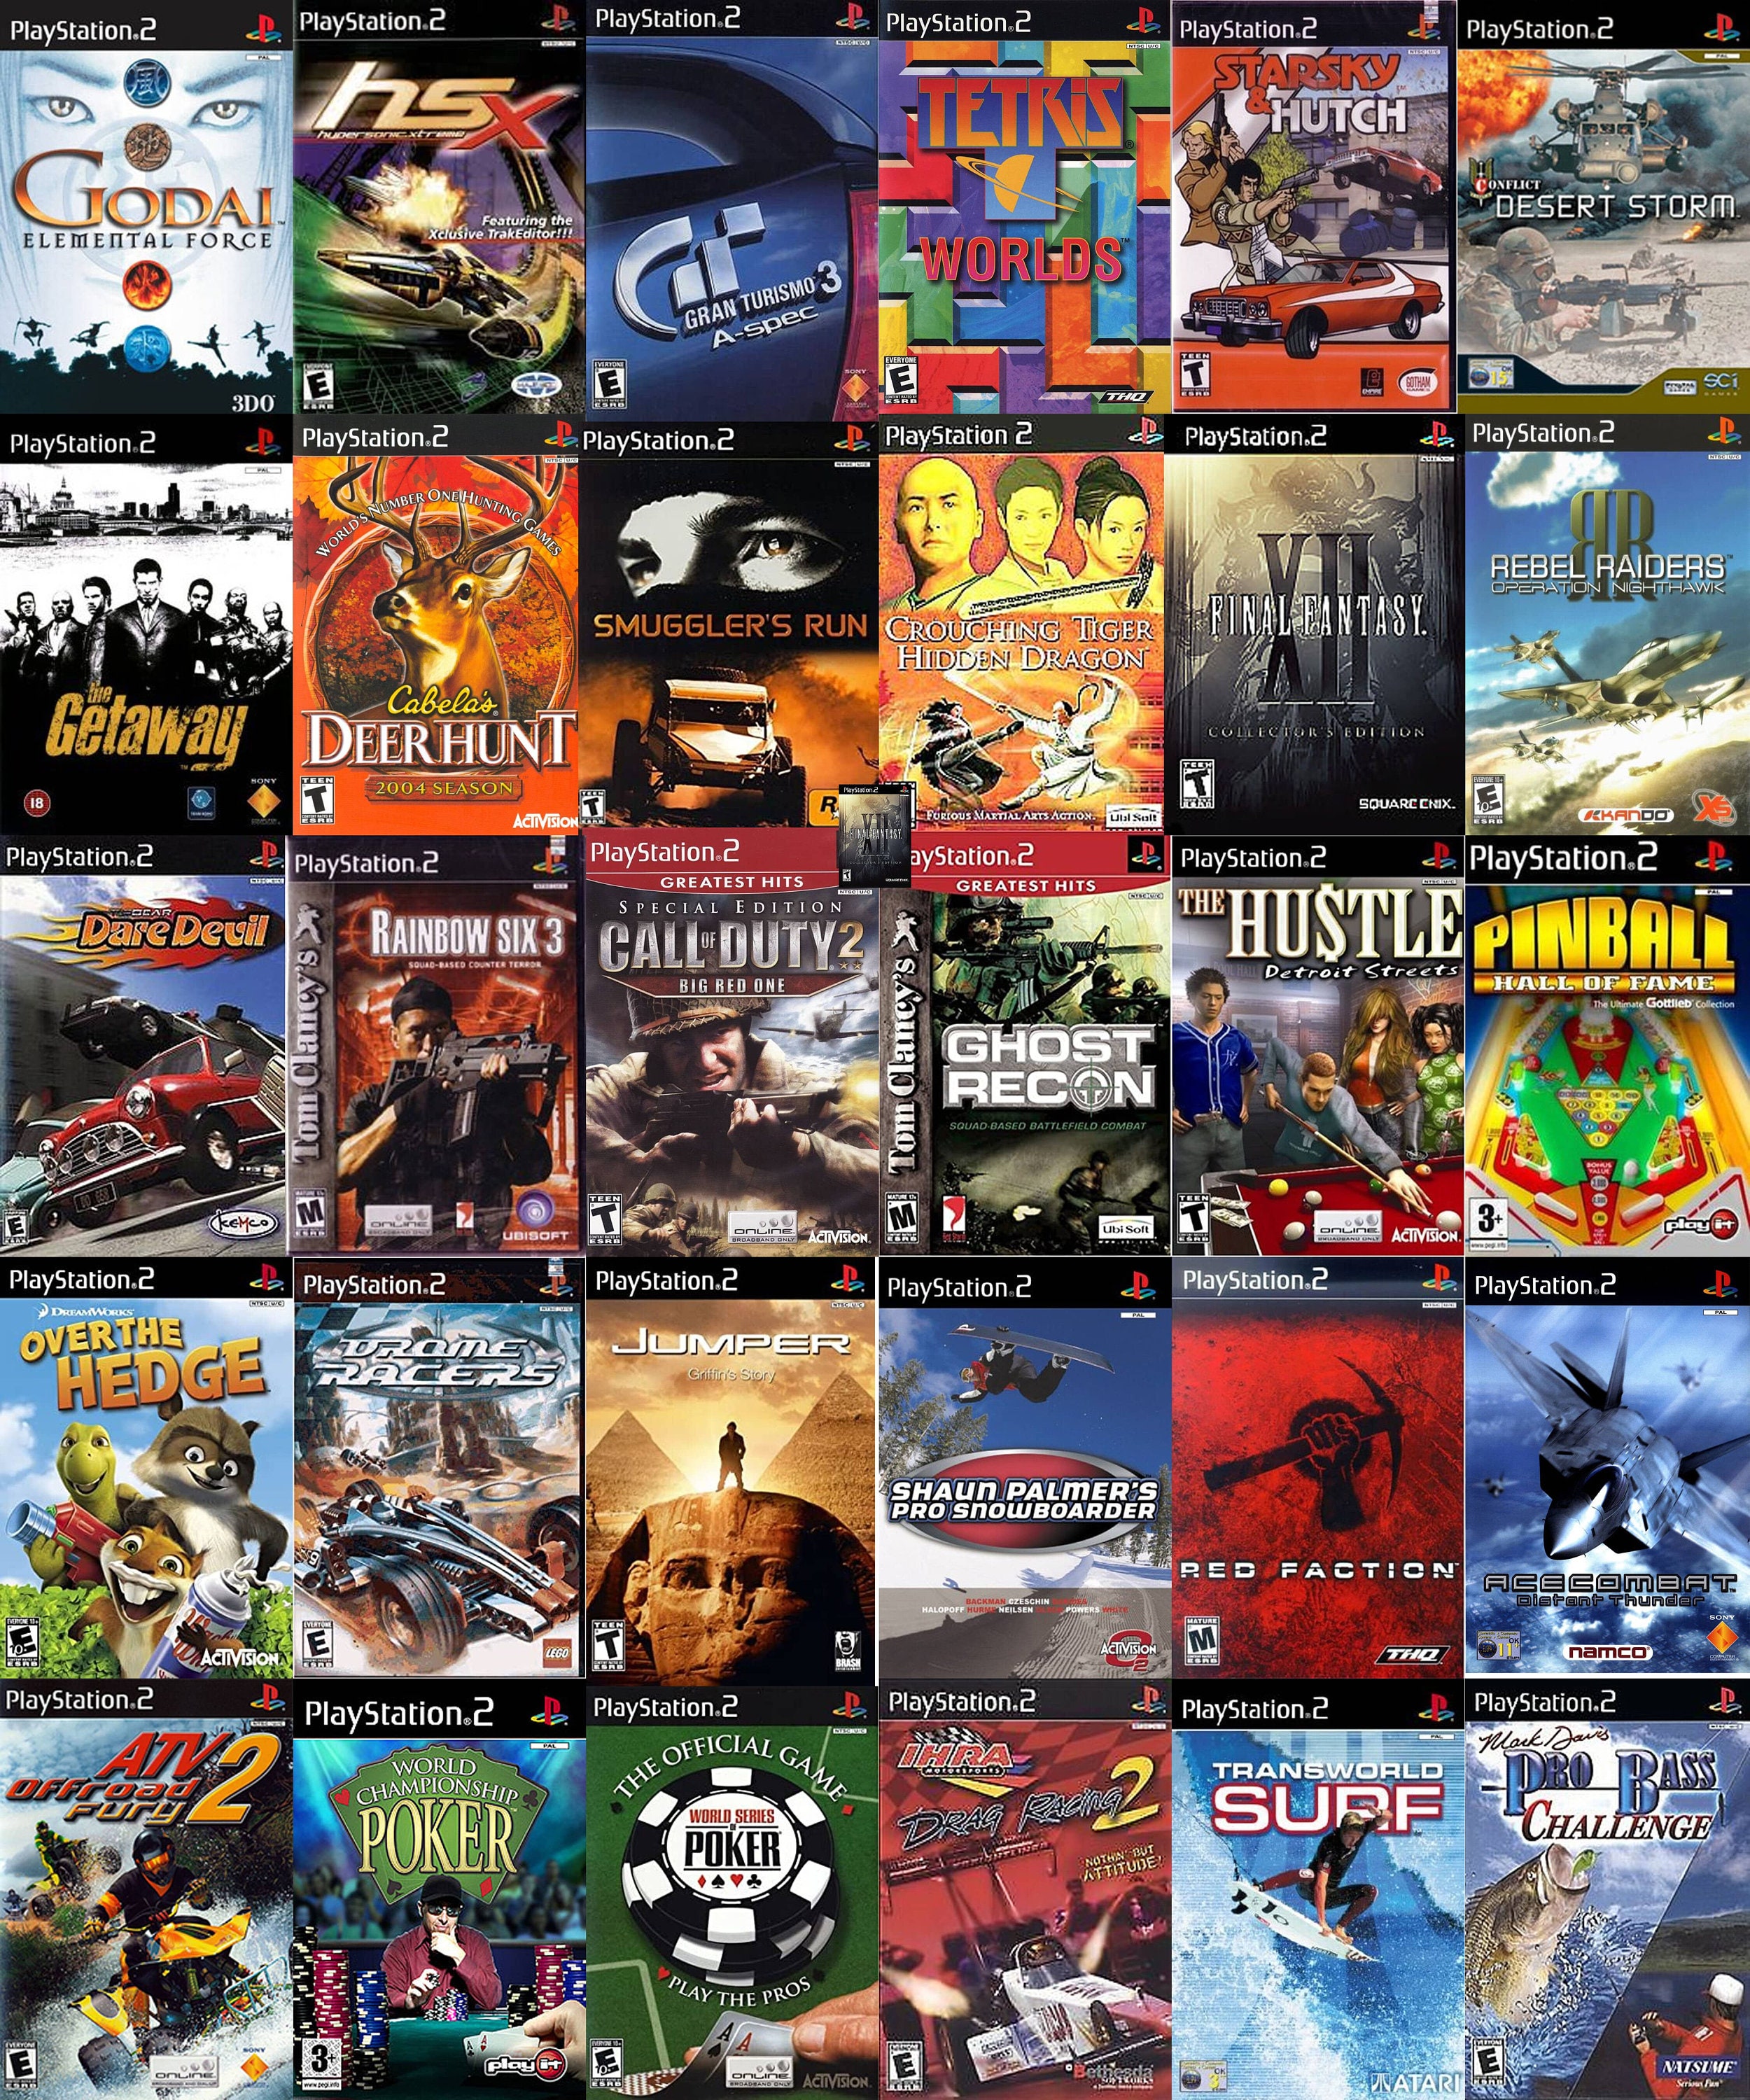 PS2 Games Download